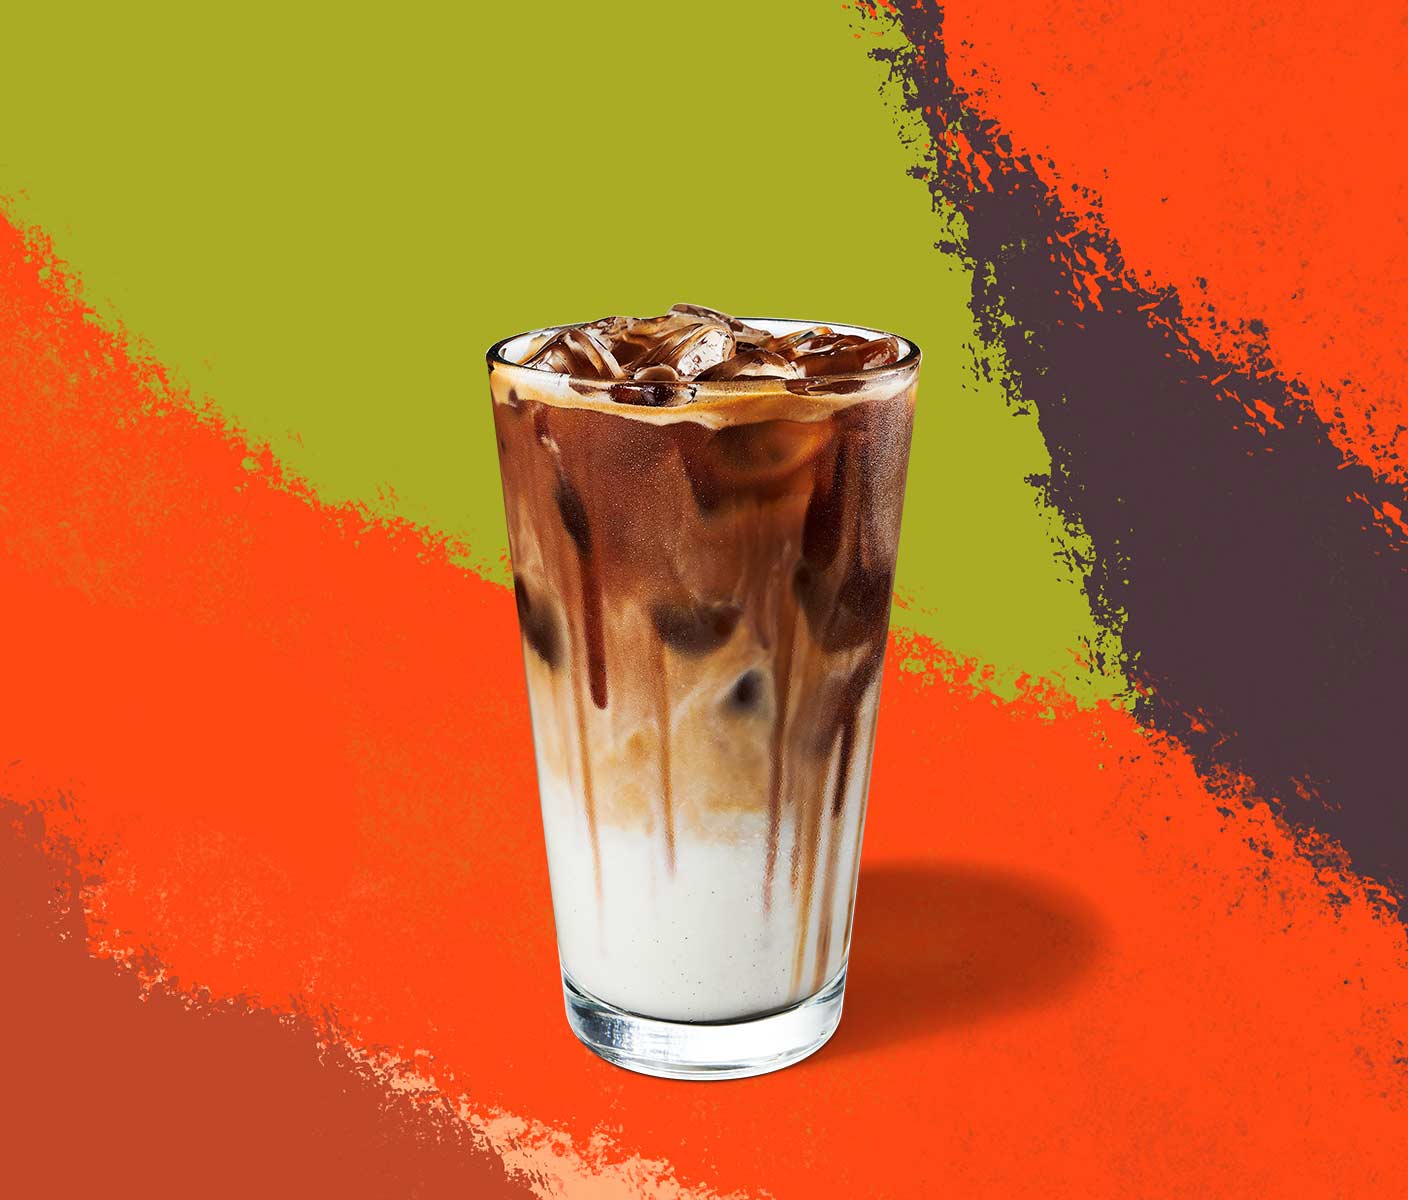 Iced coffee drink with a dark top layer and milky bottom layer inside a tall glass.